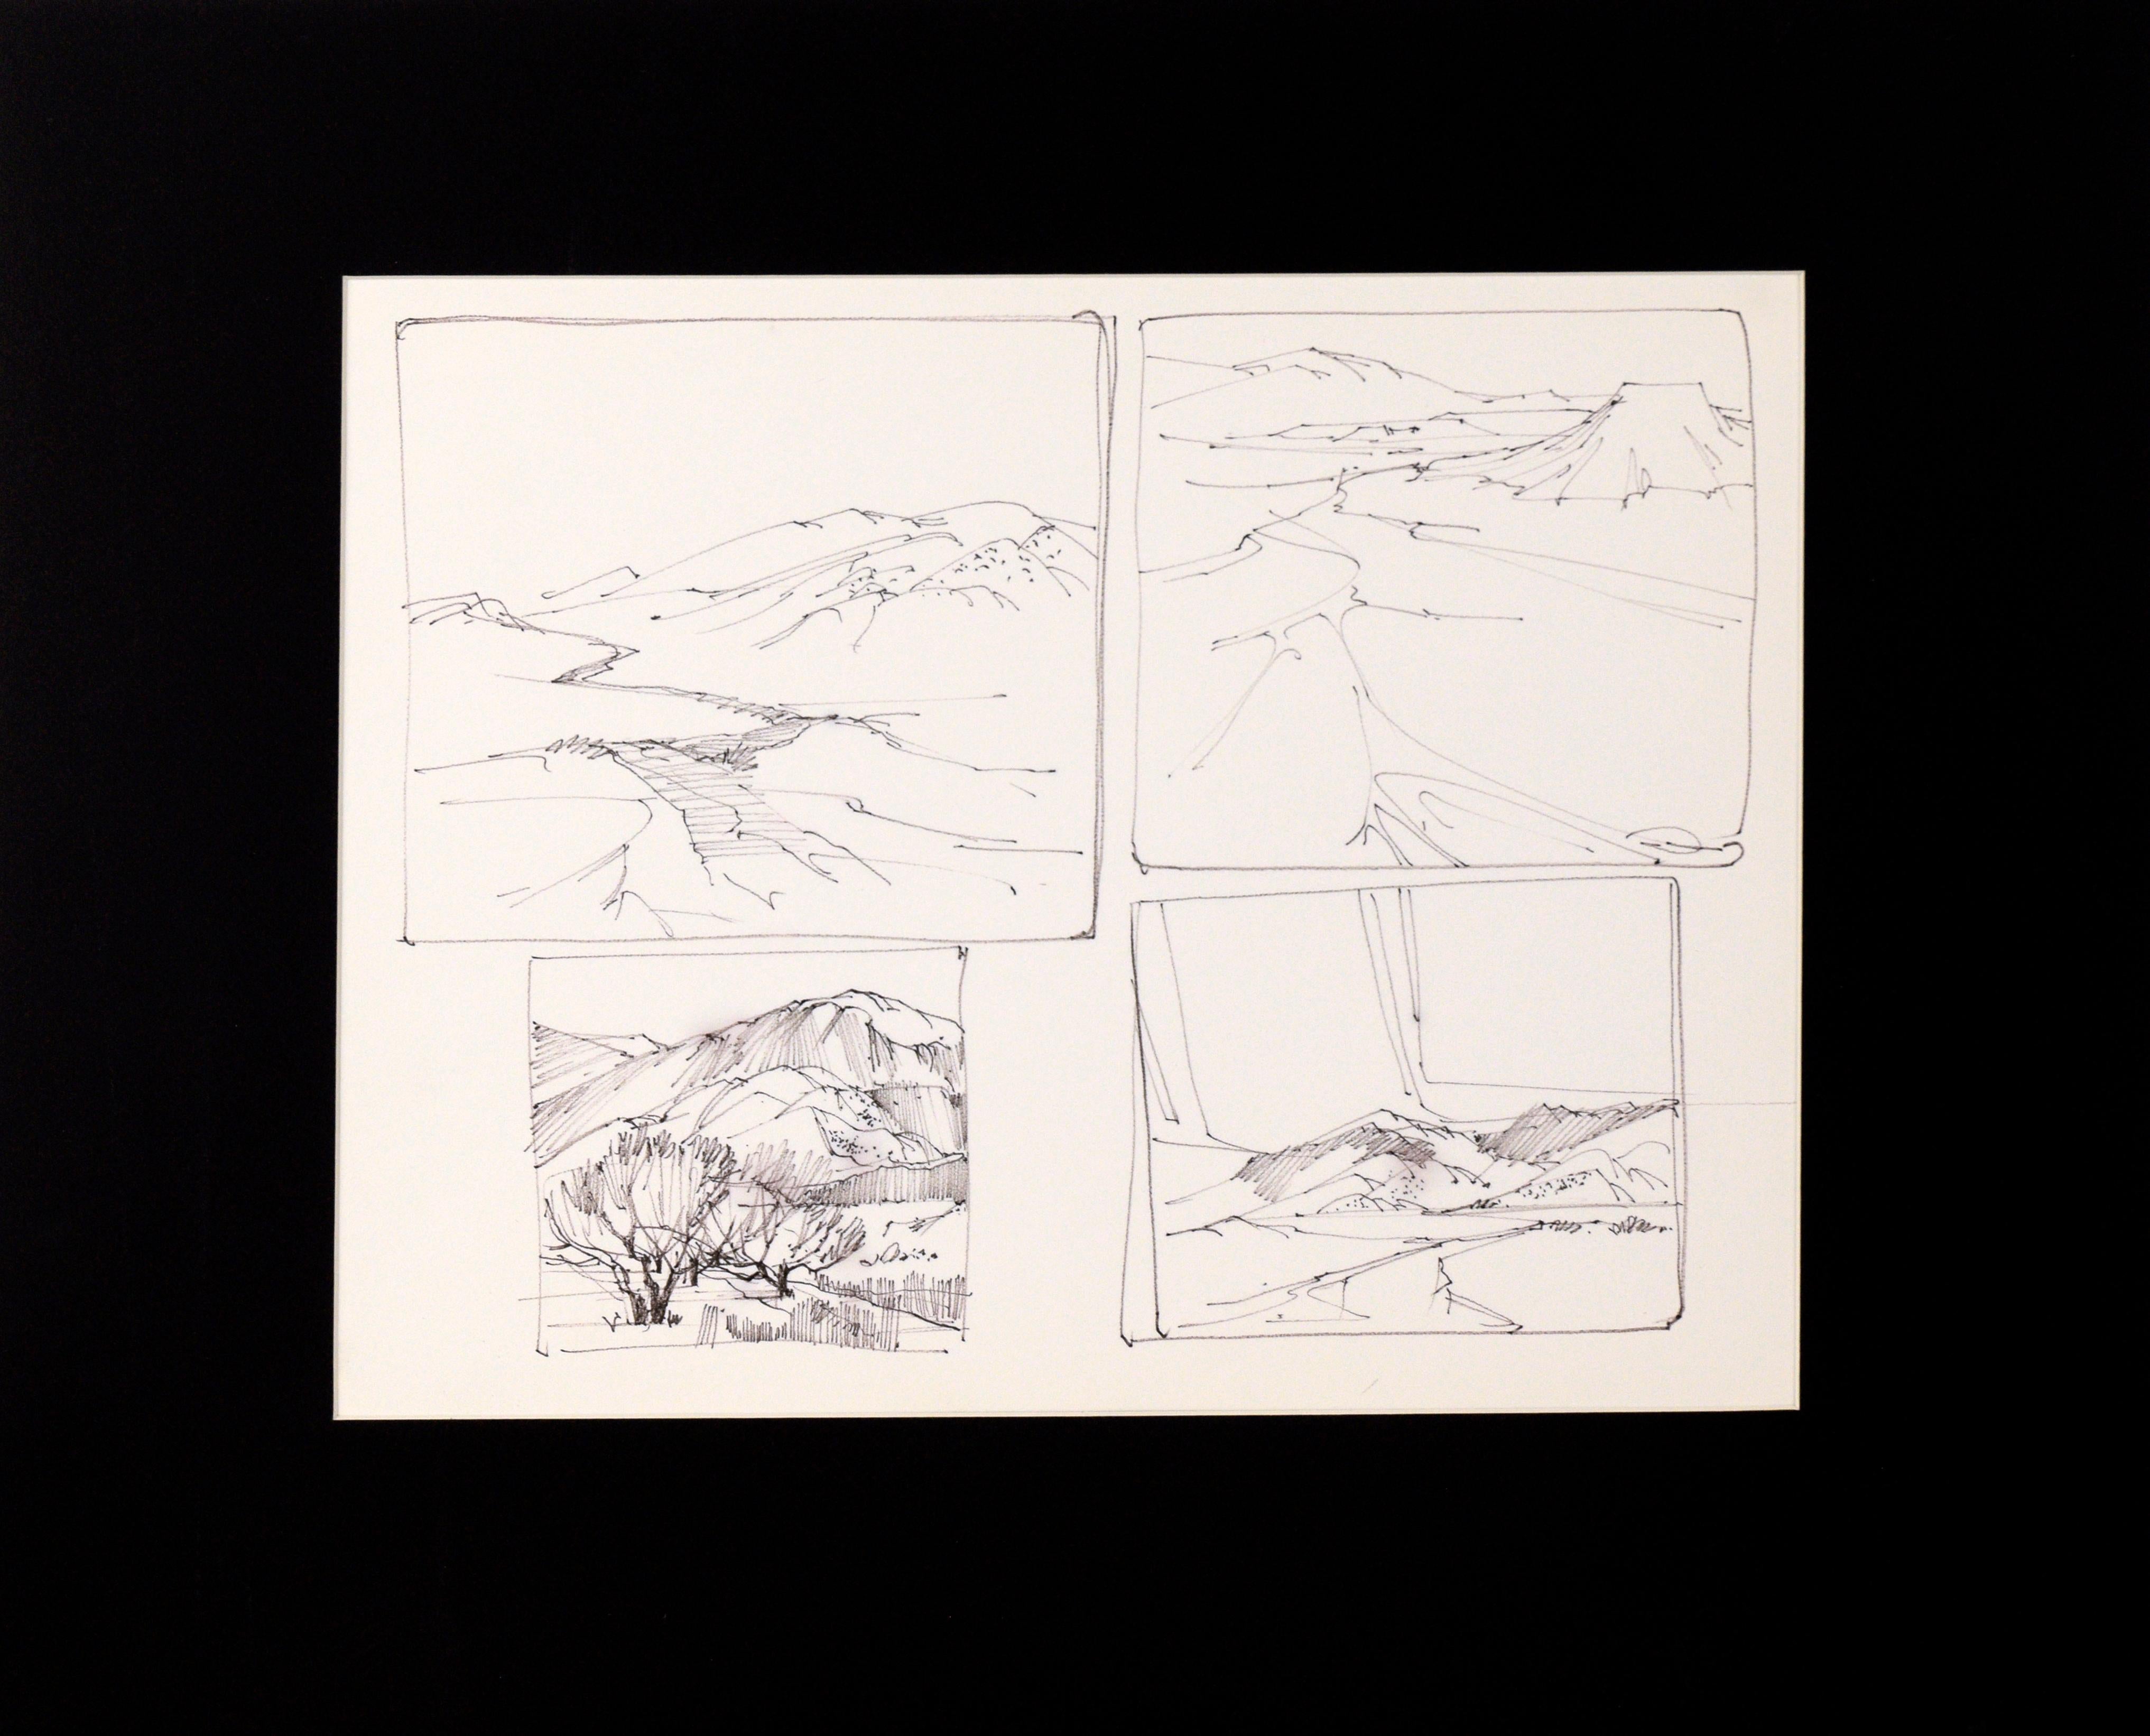 Laurence Sisson Landscape Art - Four-Panel Thumbnail Sketches of Desert and Canyon Landscapes in Ink on Paper